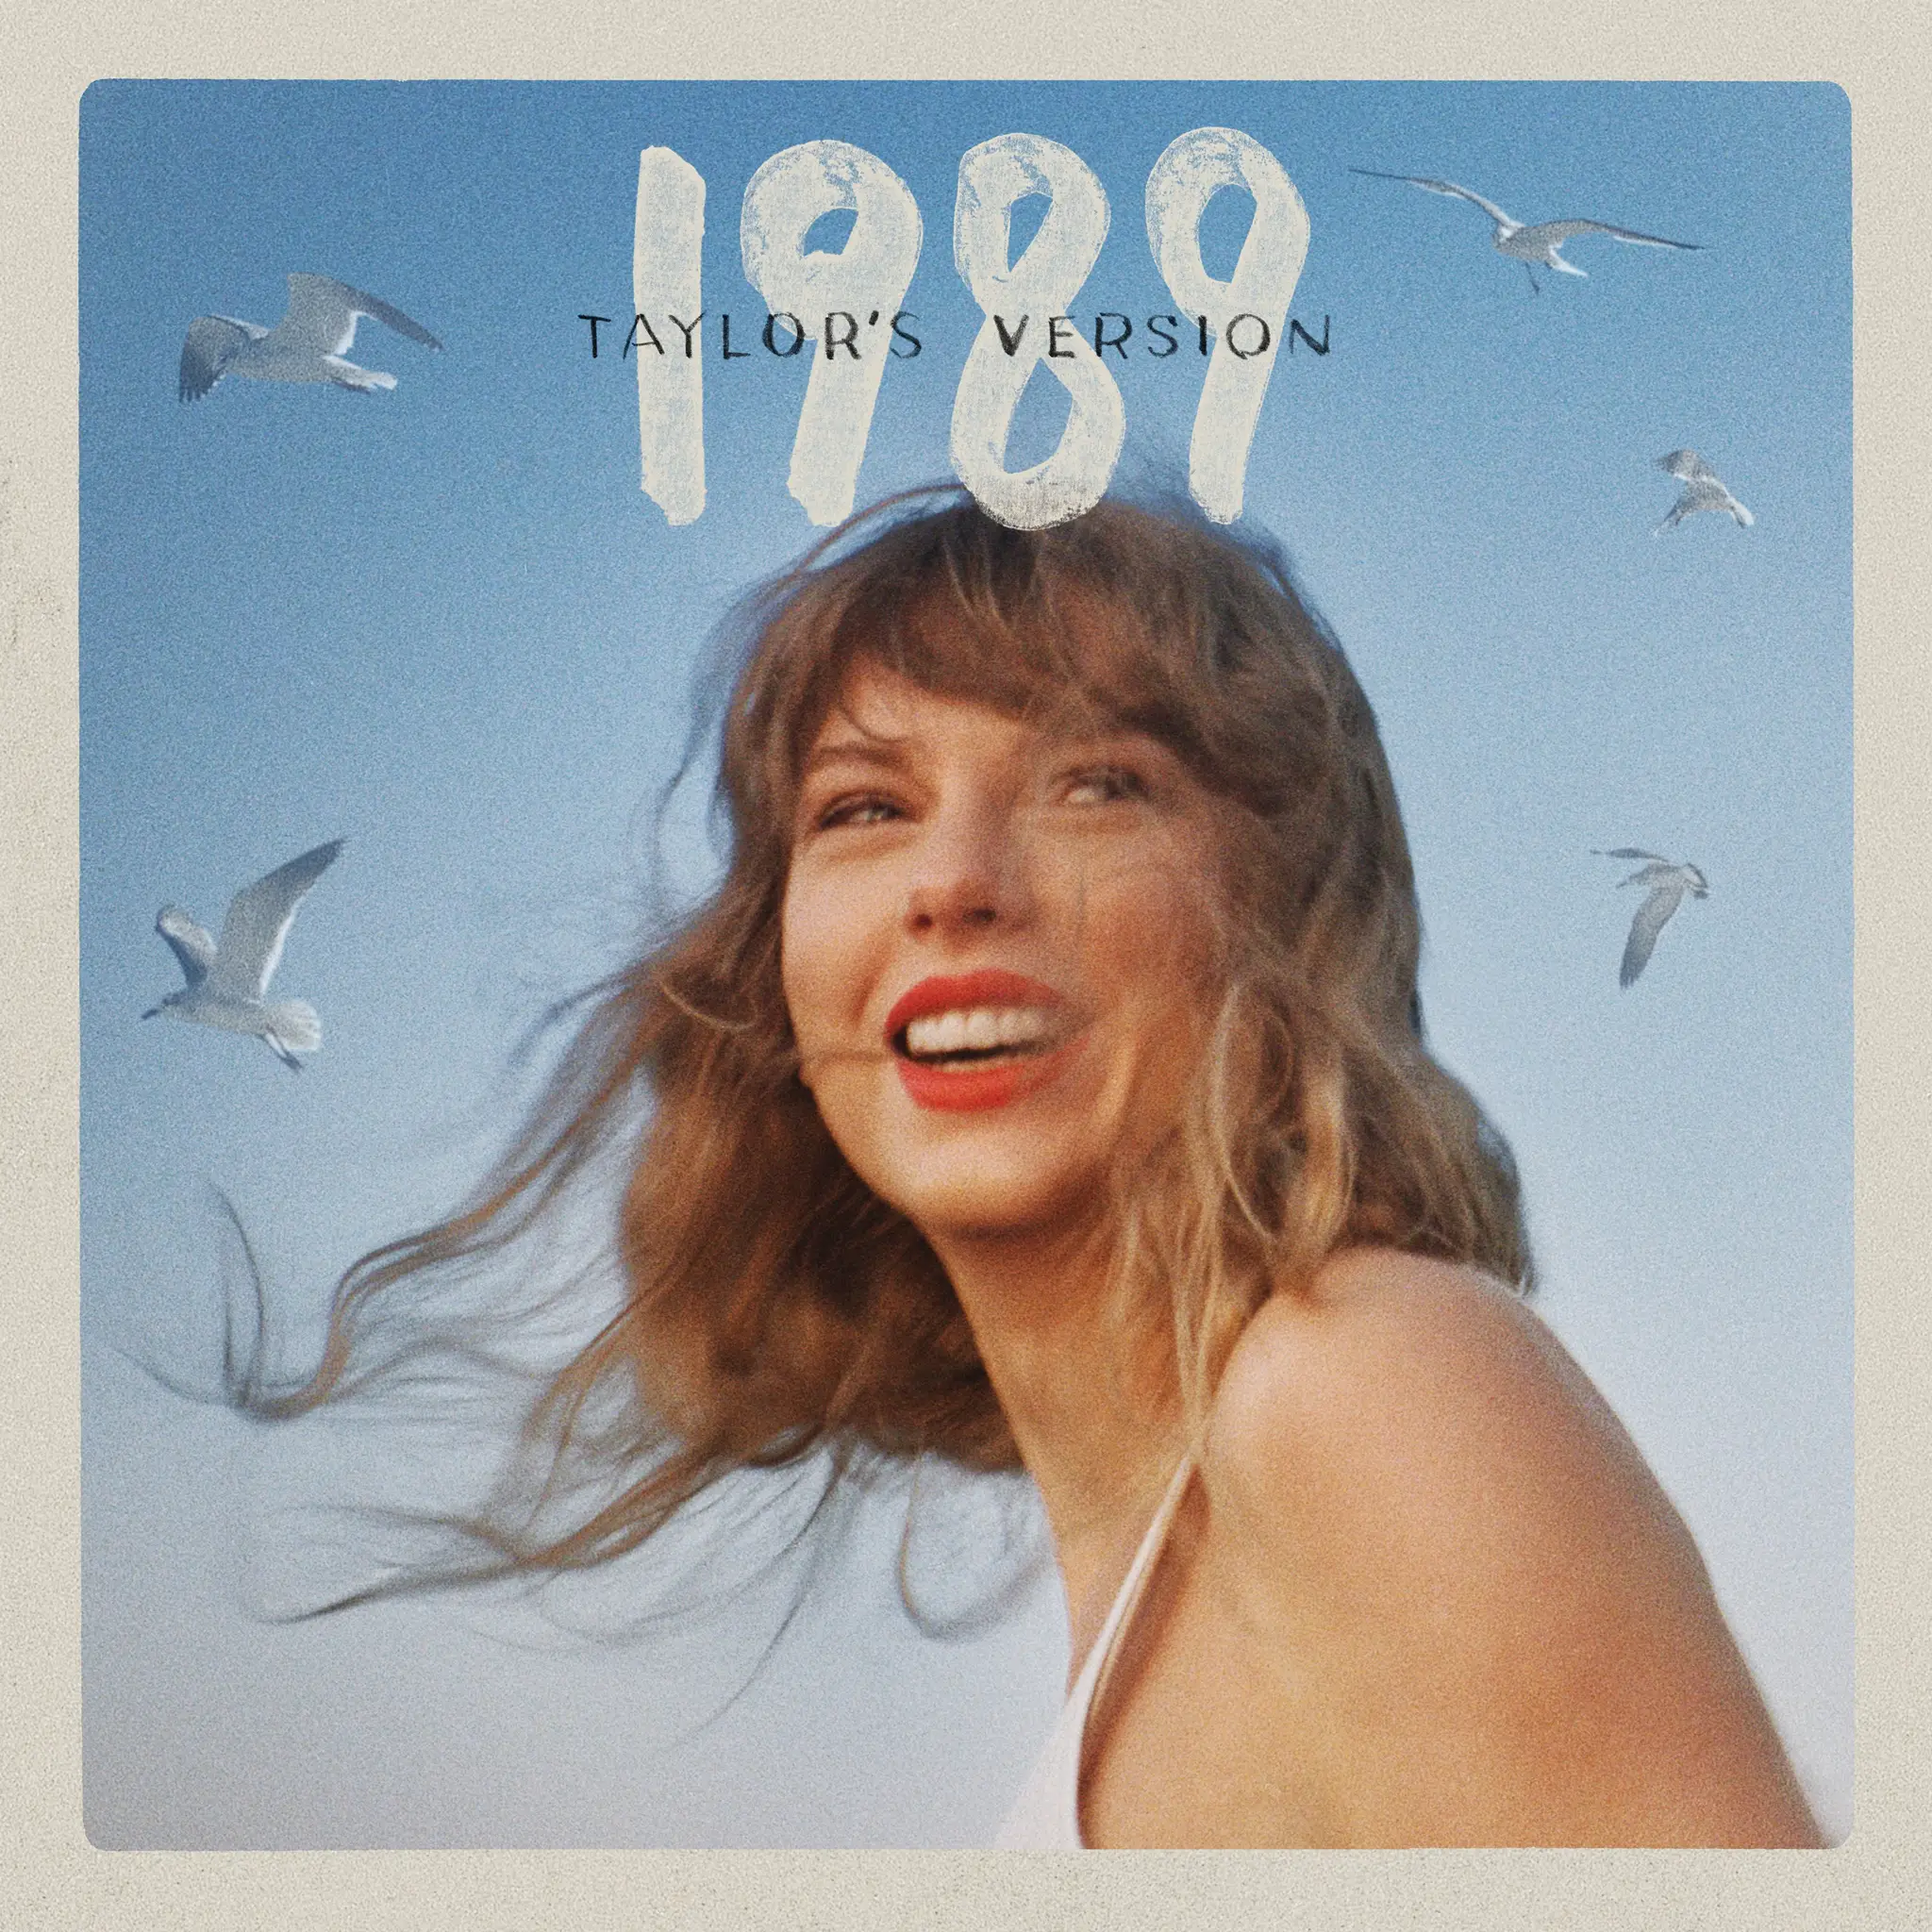 <strong>Taylor Swift - 1989 (Taylor's Version)</strong> (Vinyl LP - pink)